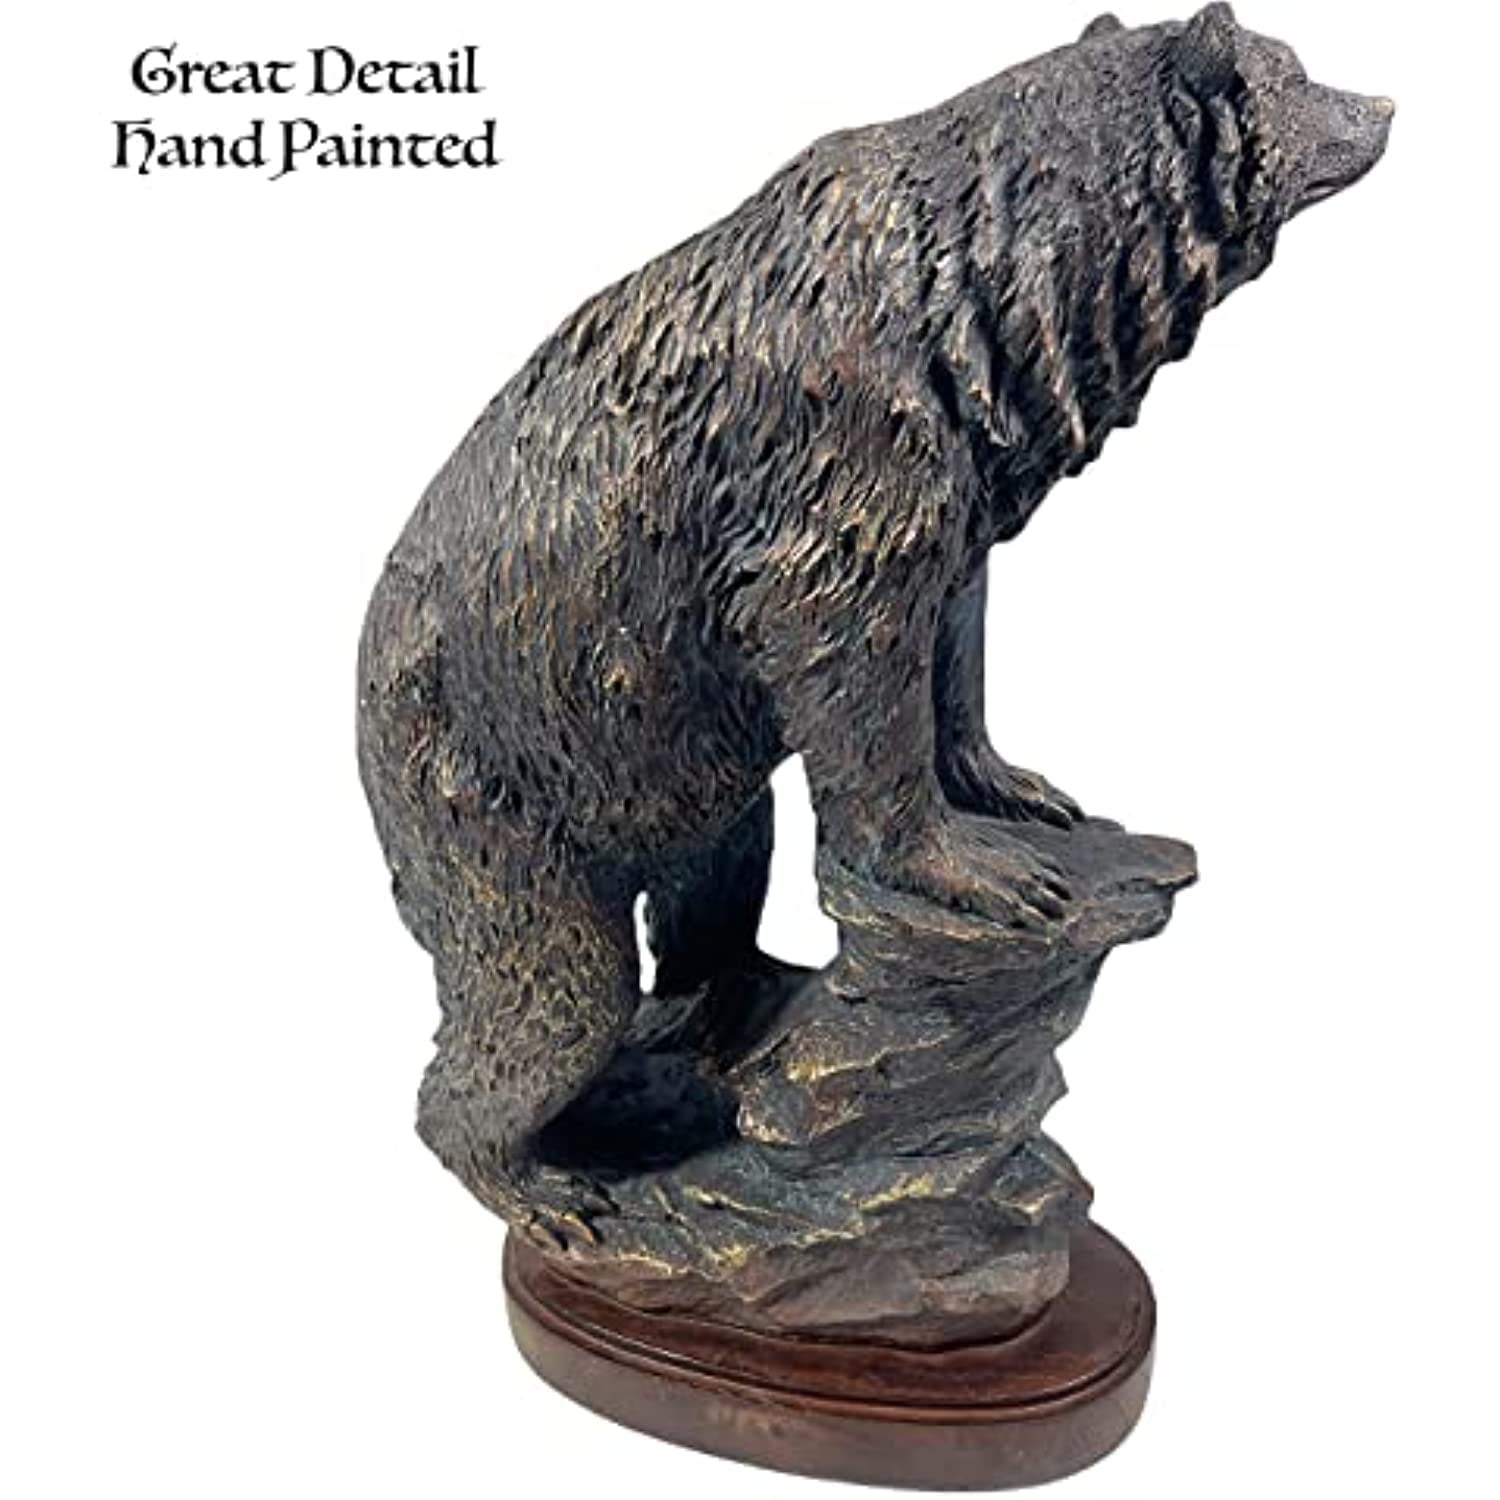 Western - Statue de Grizzly Grand Ours Brun